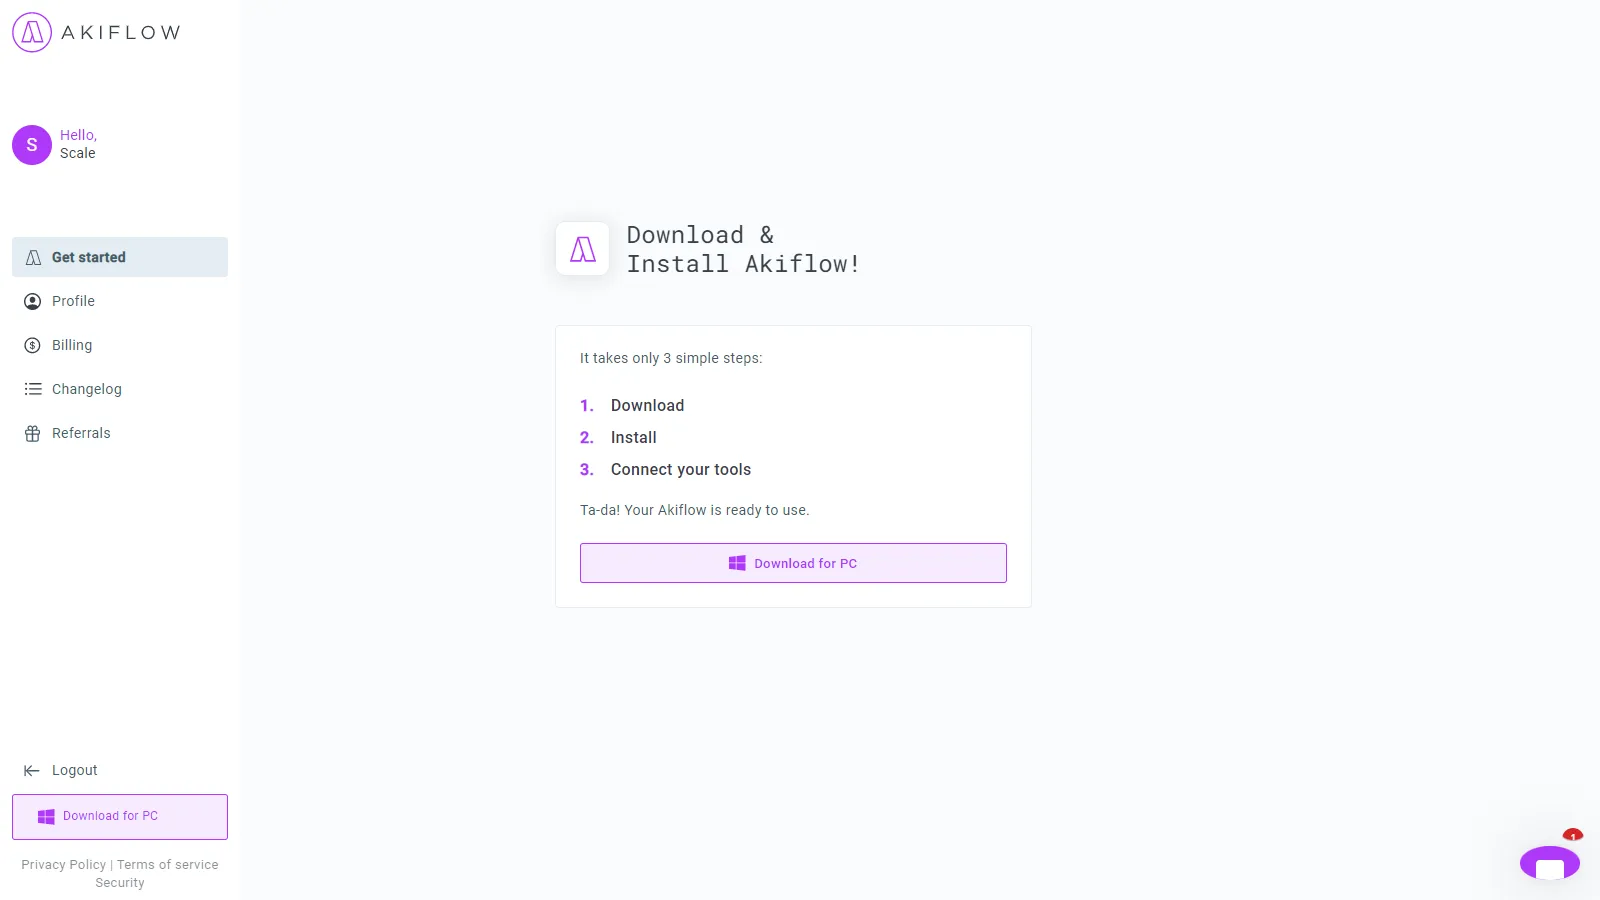 Akiflow software download page